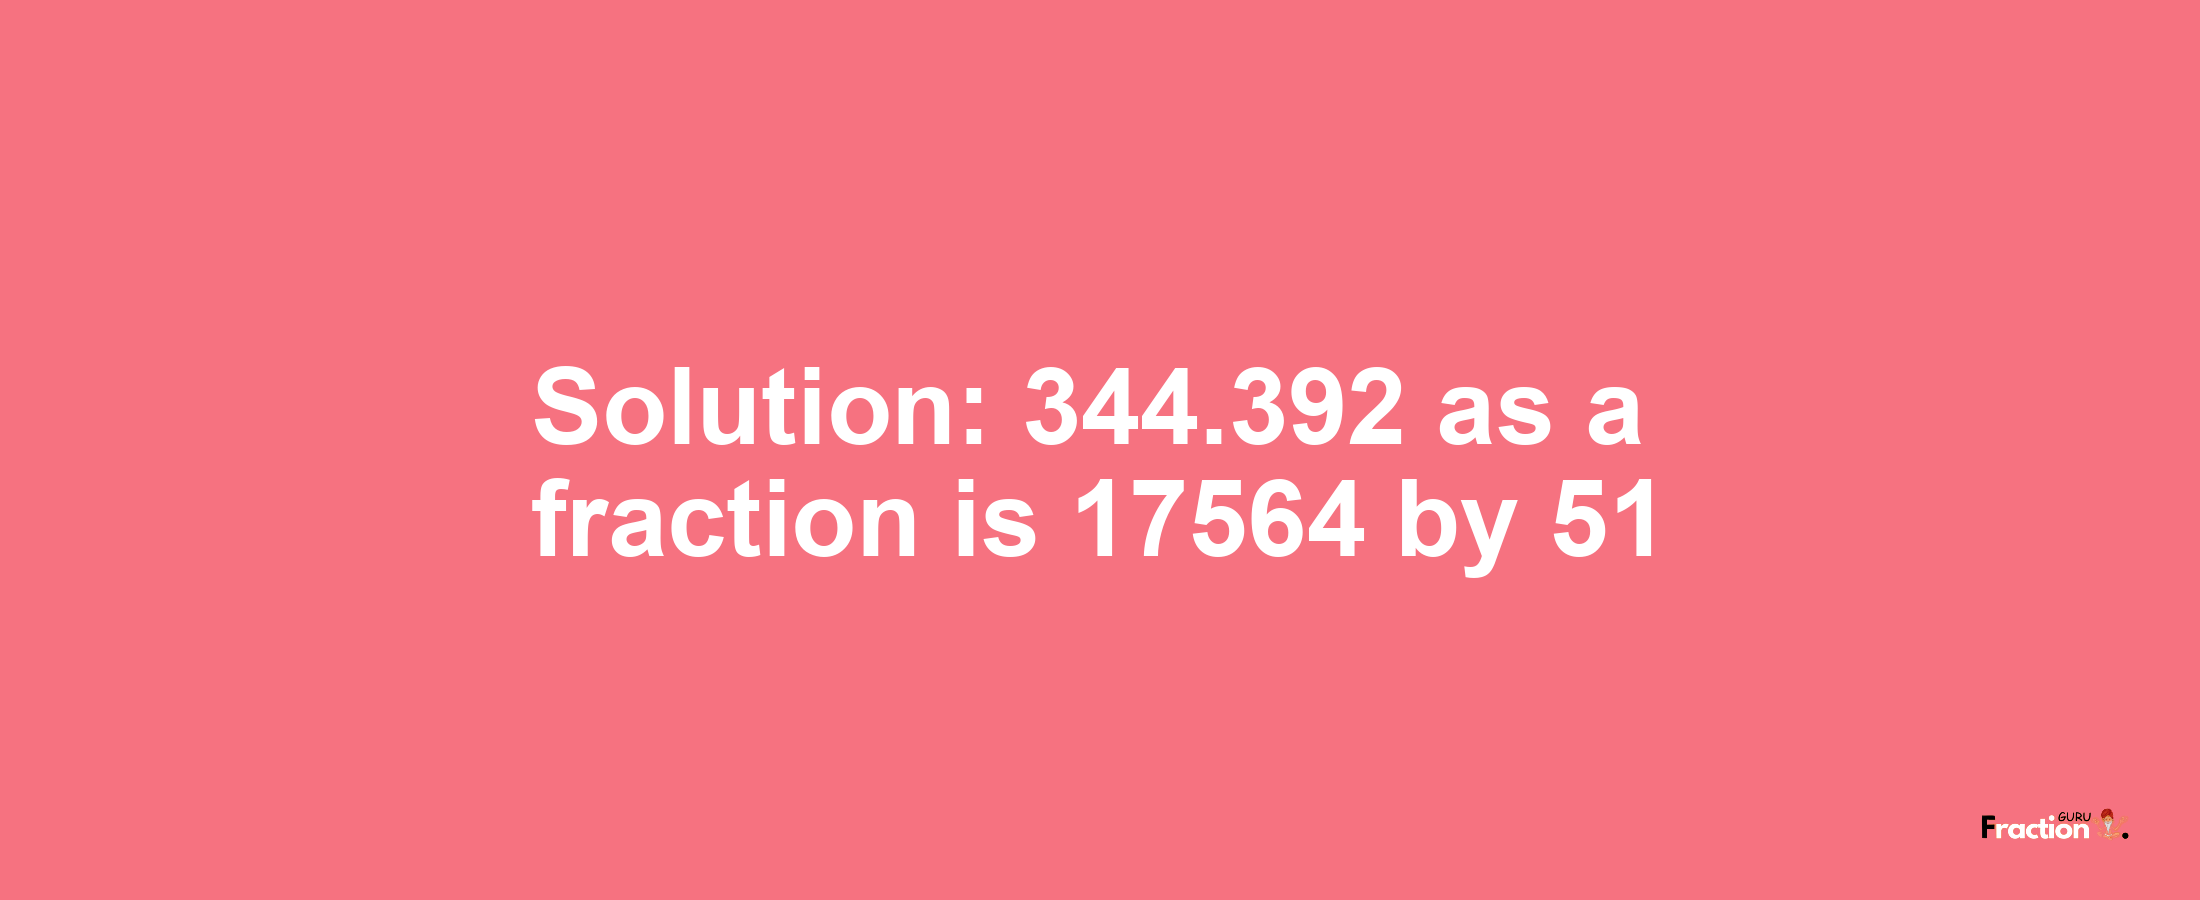 Solution:344.392 as a fraction is 17564/51